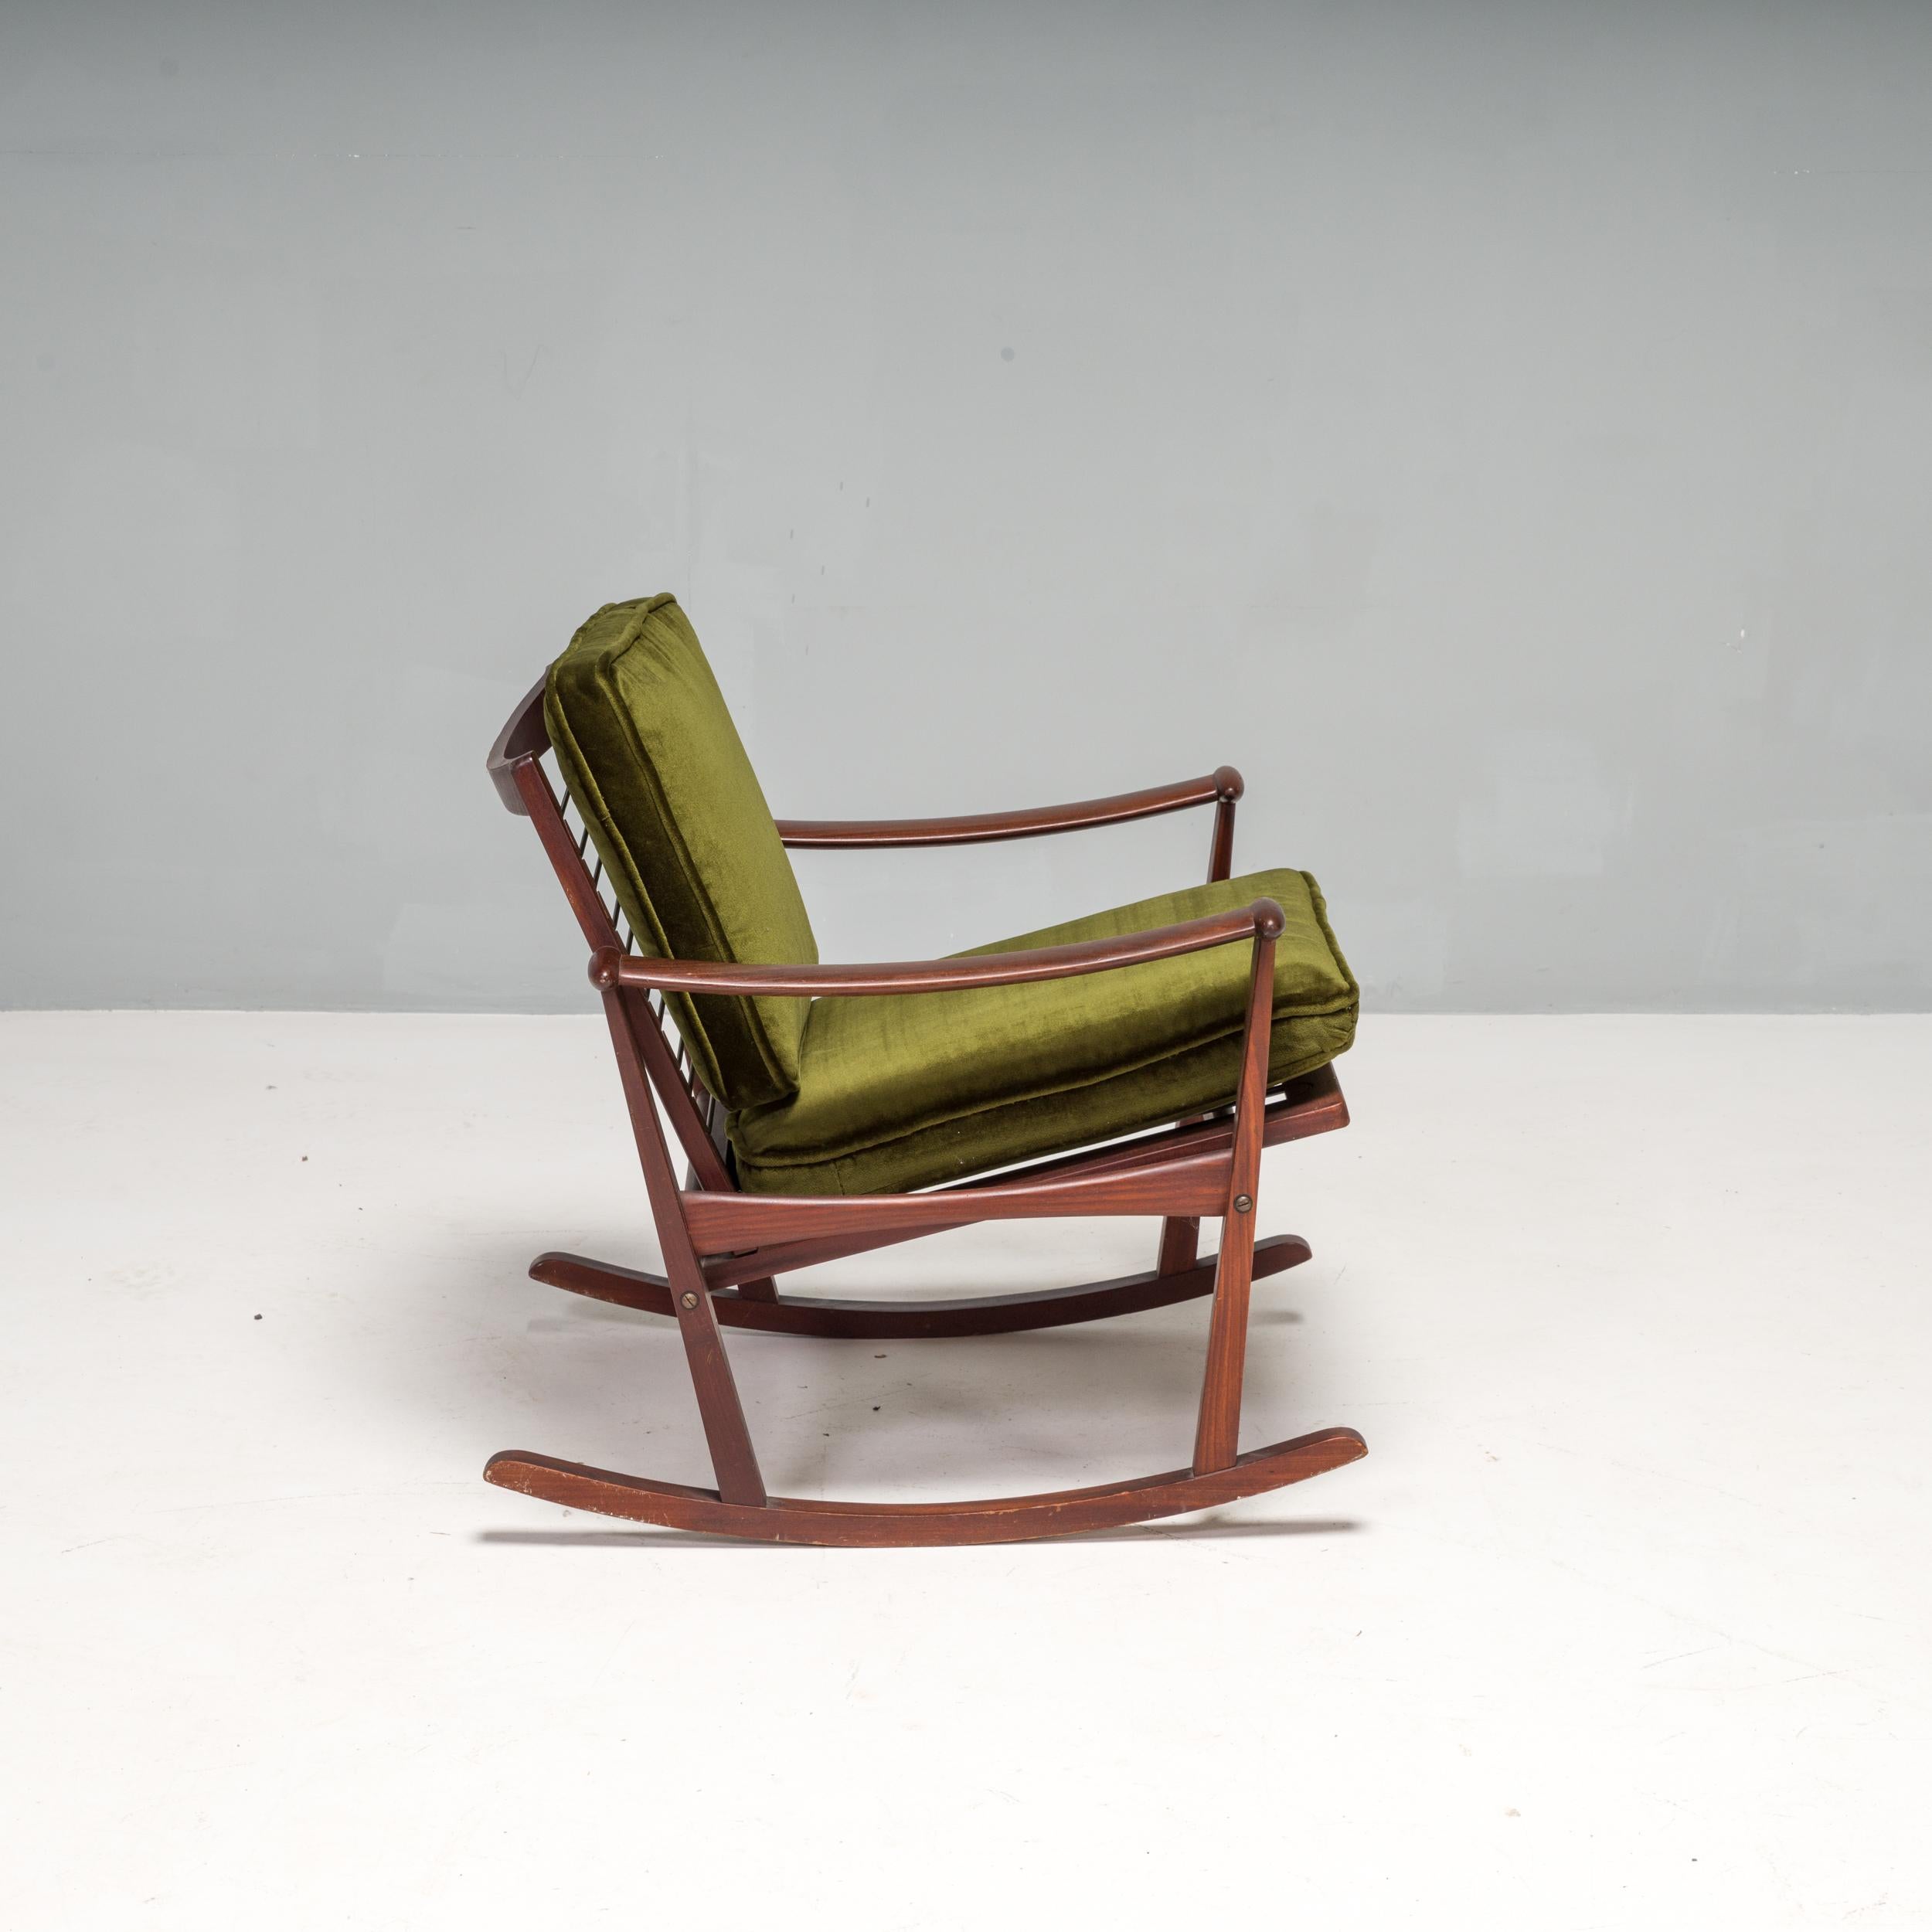 Wooden rocking chair / armchair designed by M. Nissen and sold in the Netherlands by the Dutch manufacturer Pastoe in the 1960s. 

Featuring a solid wooden frame, the chair has curved armrests and a curved base allowing the chair to rock.

The chair